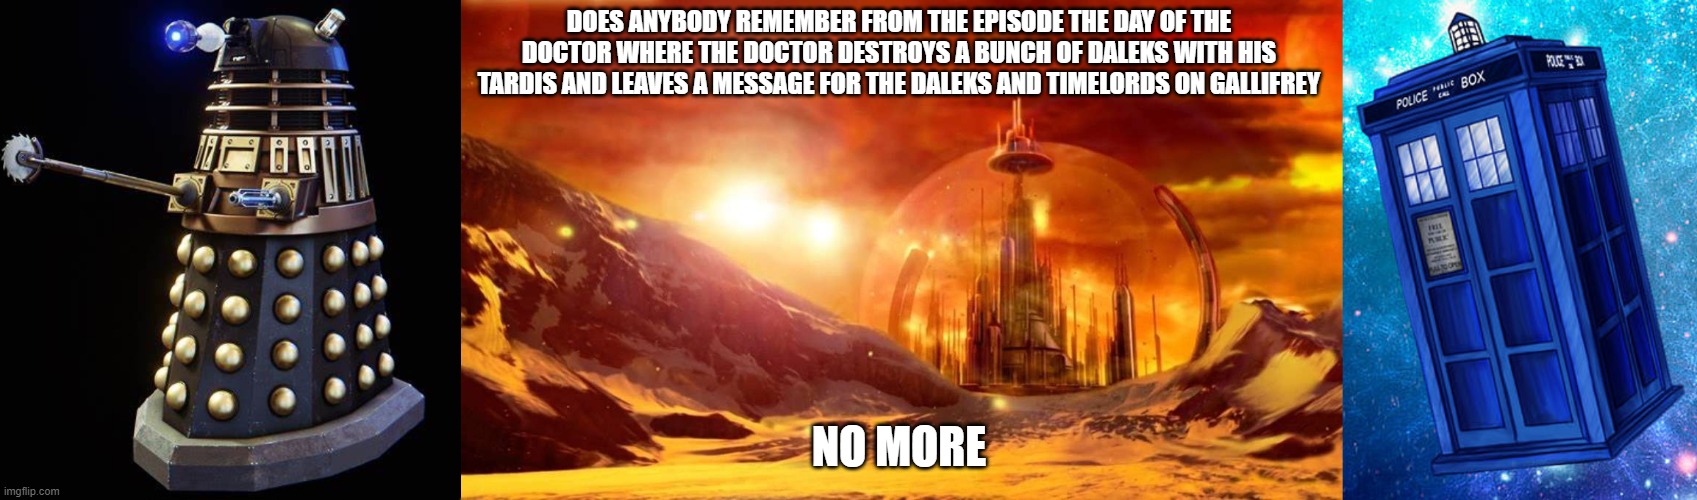 the tardis vs dalek | DOES ANYBODY REMEMBER FROM THE EPISODE THE DAY OF THE DOCTOR WHERE THE DOCTOR DESTROYS A BUNCH OF DALEKS WITH HIS TARDIS AND LEAVES A MESSAGE FOR THE DALEKS AND TIMELORDS ON GALLIFREY; NO MORE | image tagged in funny memes,memes,doctor who,tardis,daleks,timelords | made w/ Imgflip meme maker